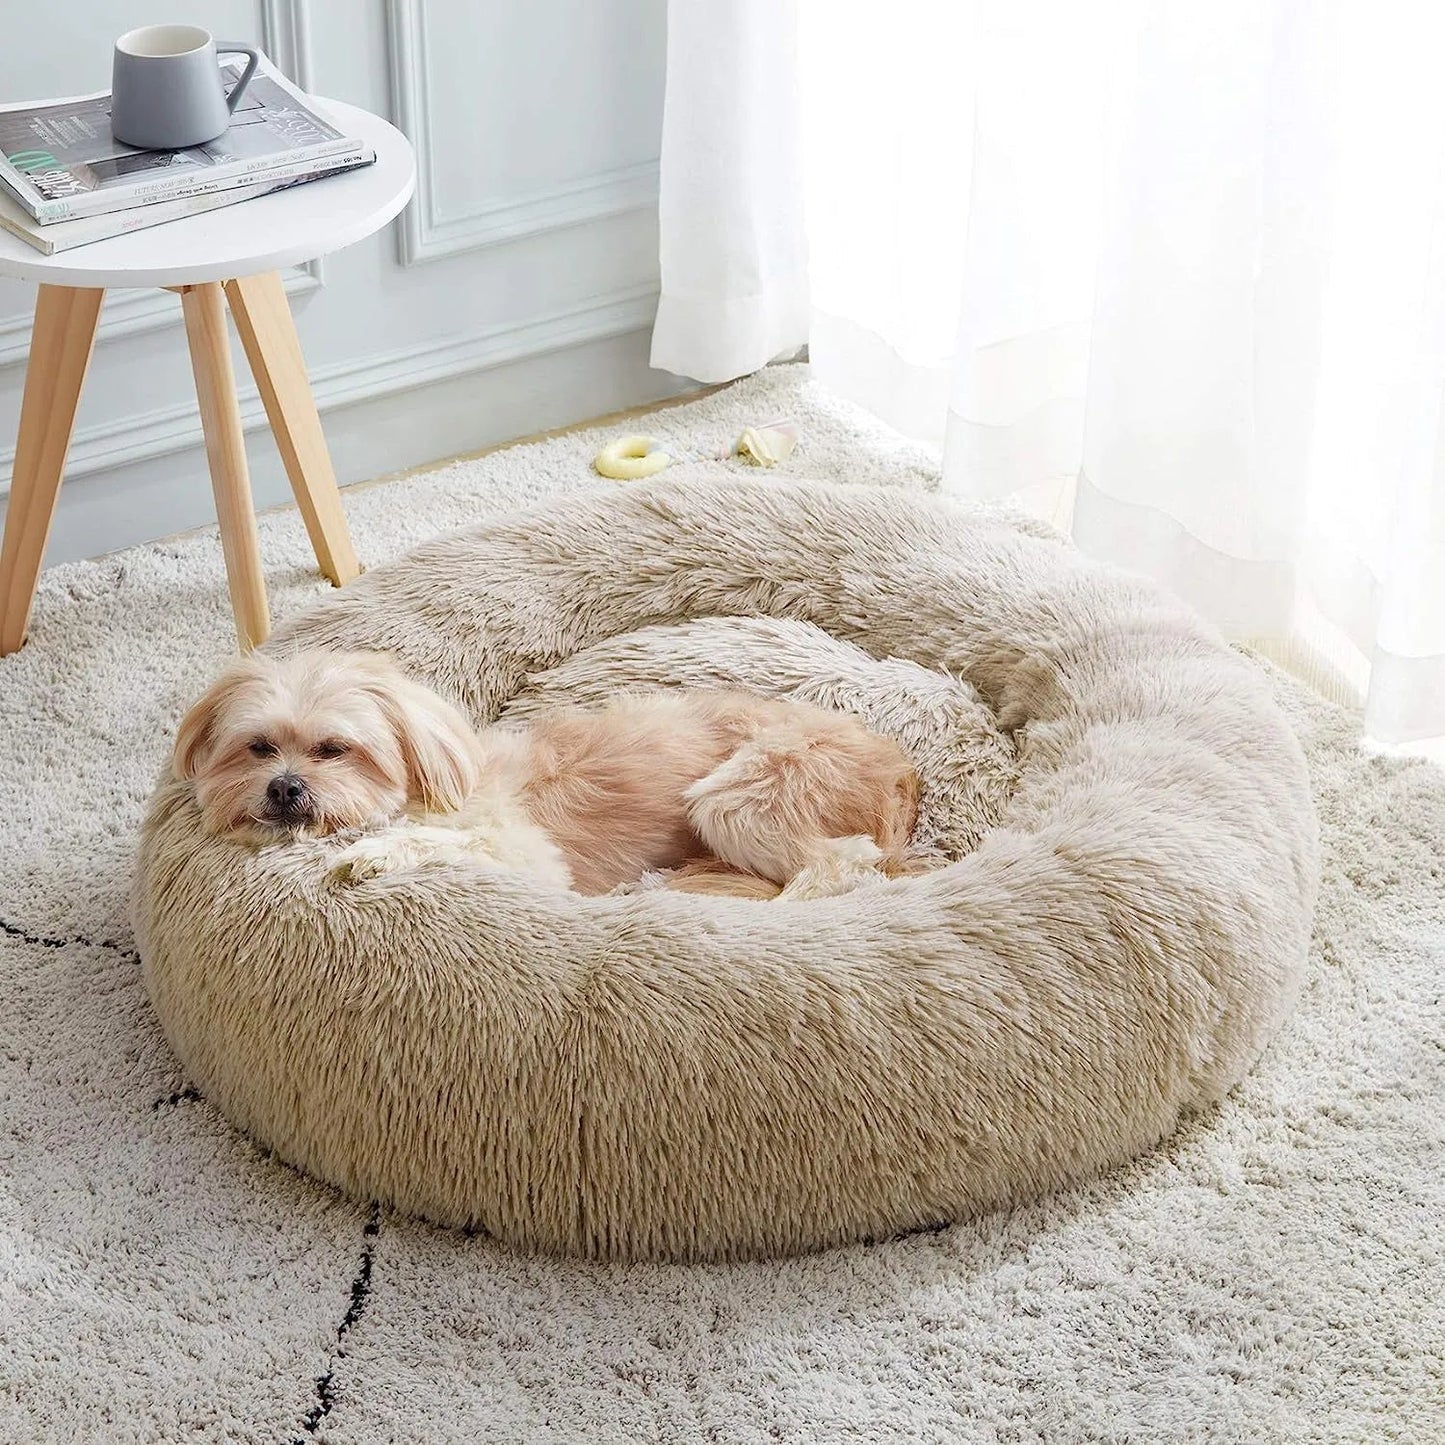 Super Cat Bed Warm Sleeping Cat Nest Soft Long Plush Best Pet Dog Bed for Dogs Basket Cushion Cat Bed Cat Mat Animals Sleeping Brown